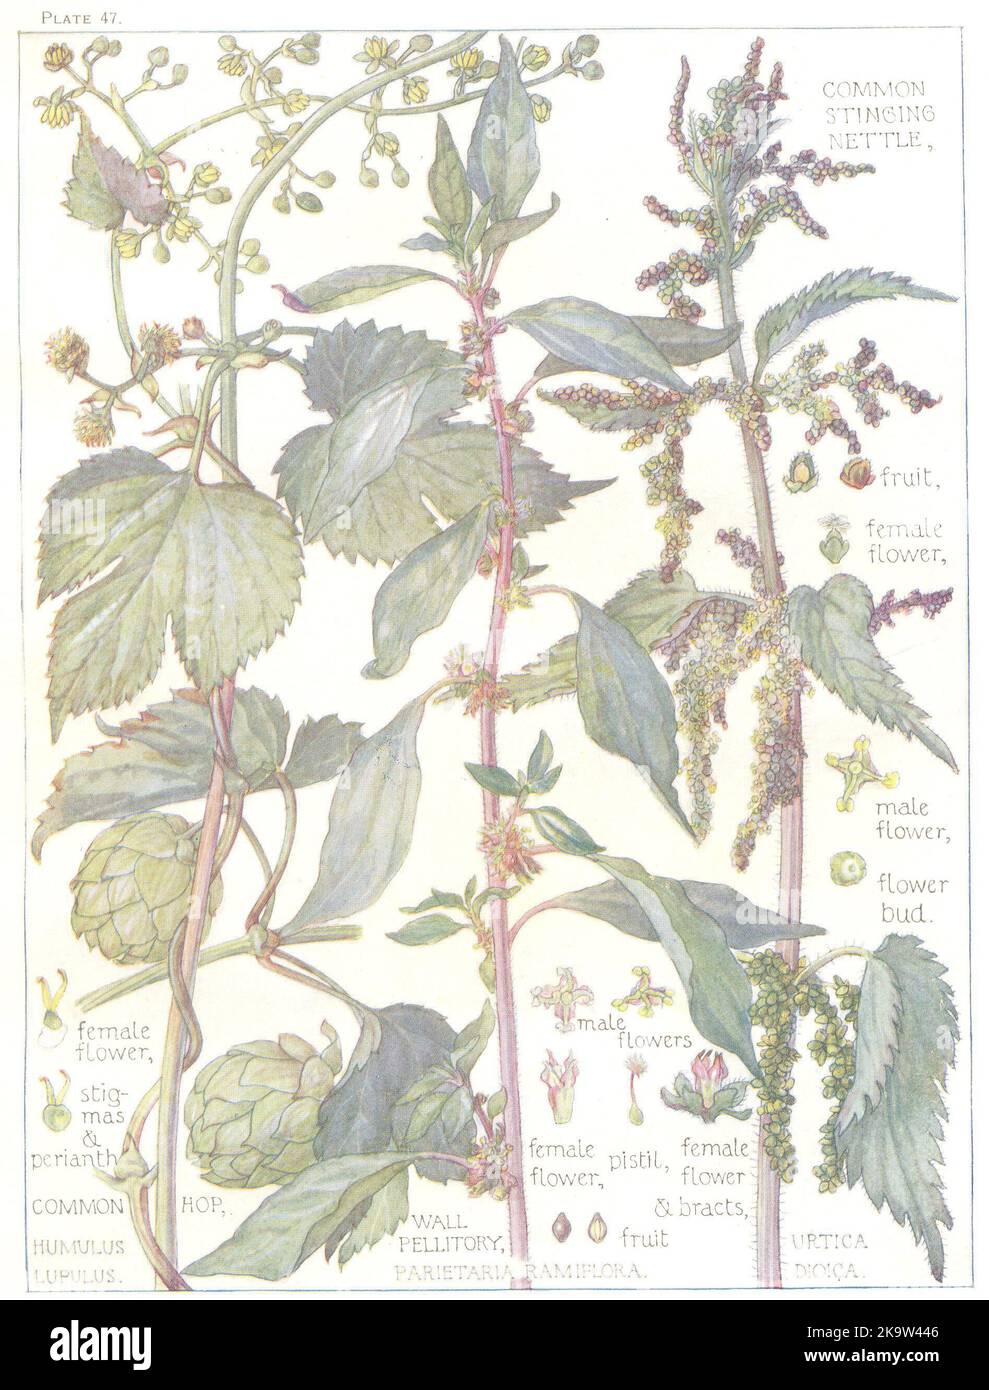 NETTLES. Urticaceae. Common Stinging Nettle; Common Hop; Wall Pellitory 1907 Stock Photo